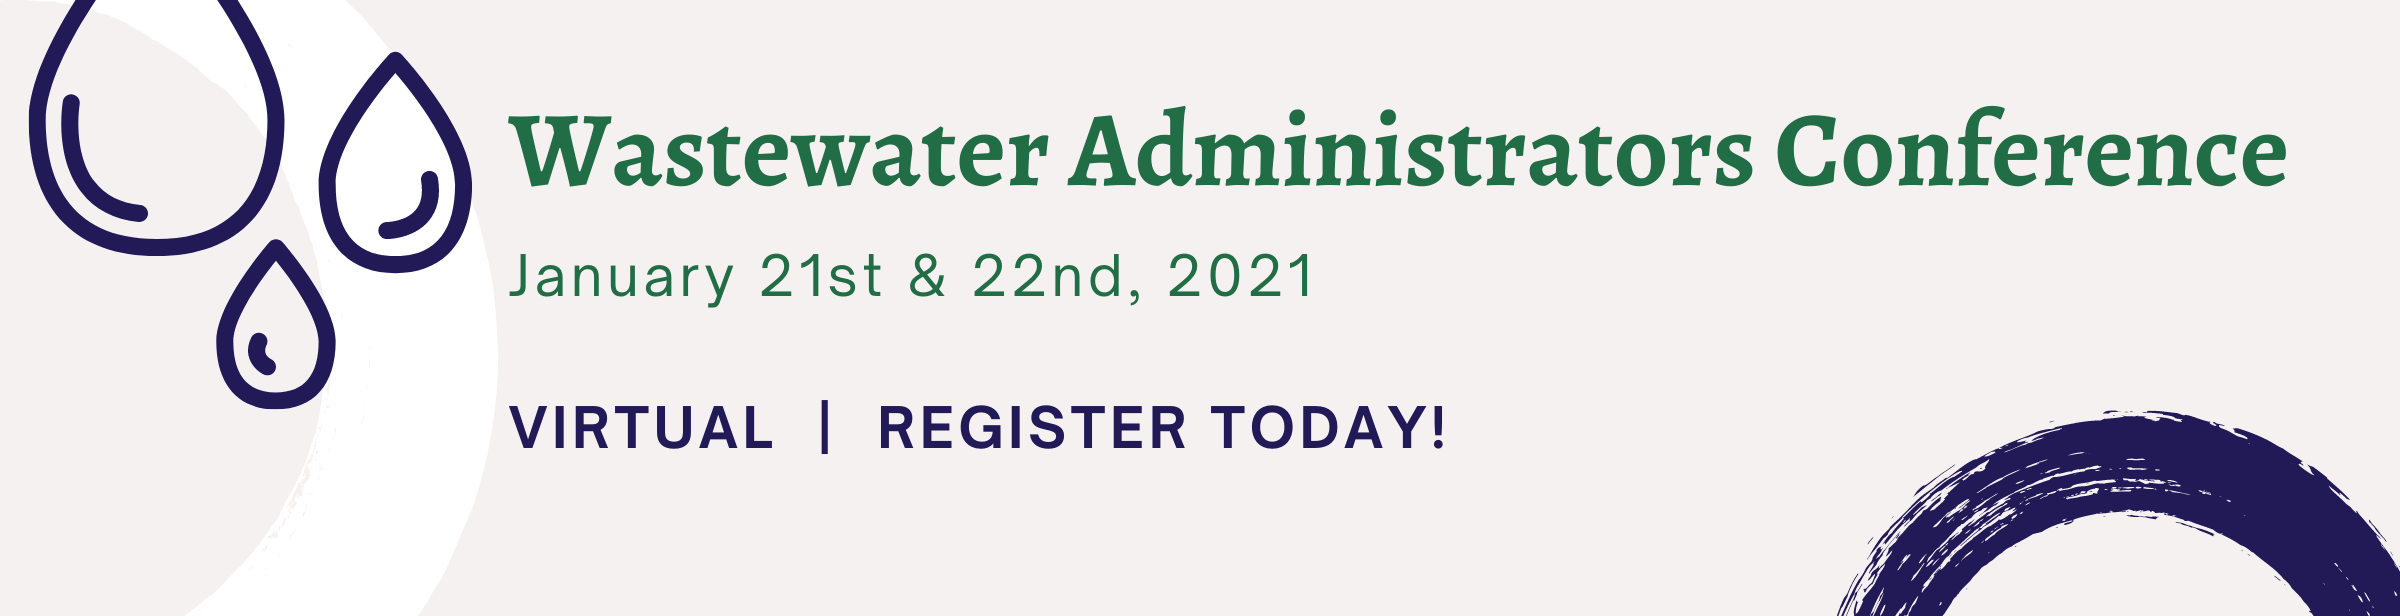 Wastewater Administrators Conference (WWAdCon) Michigan Water